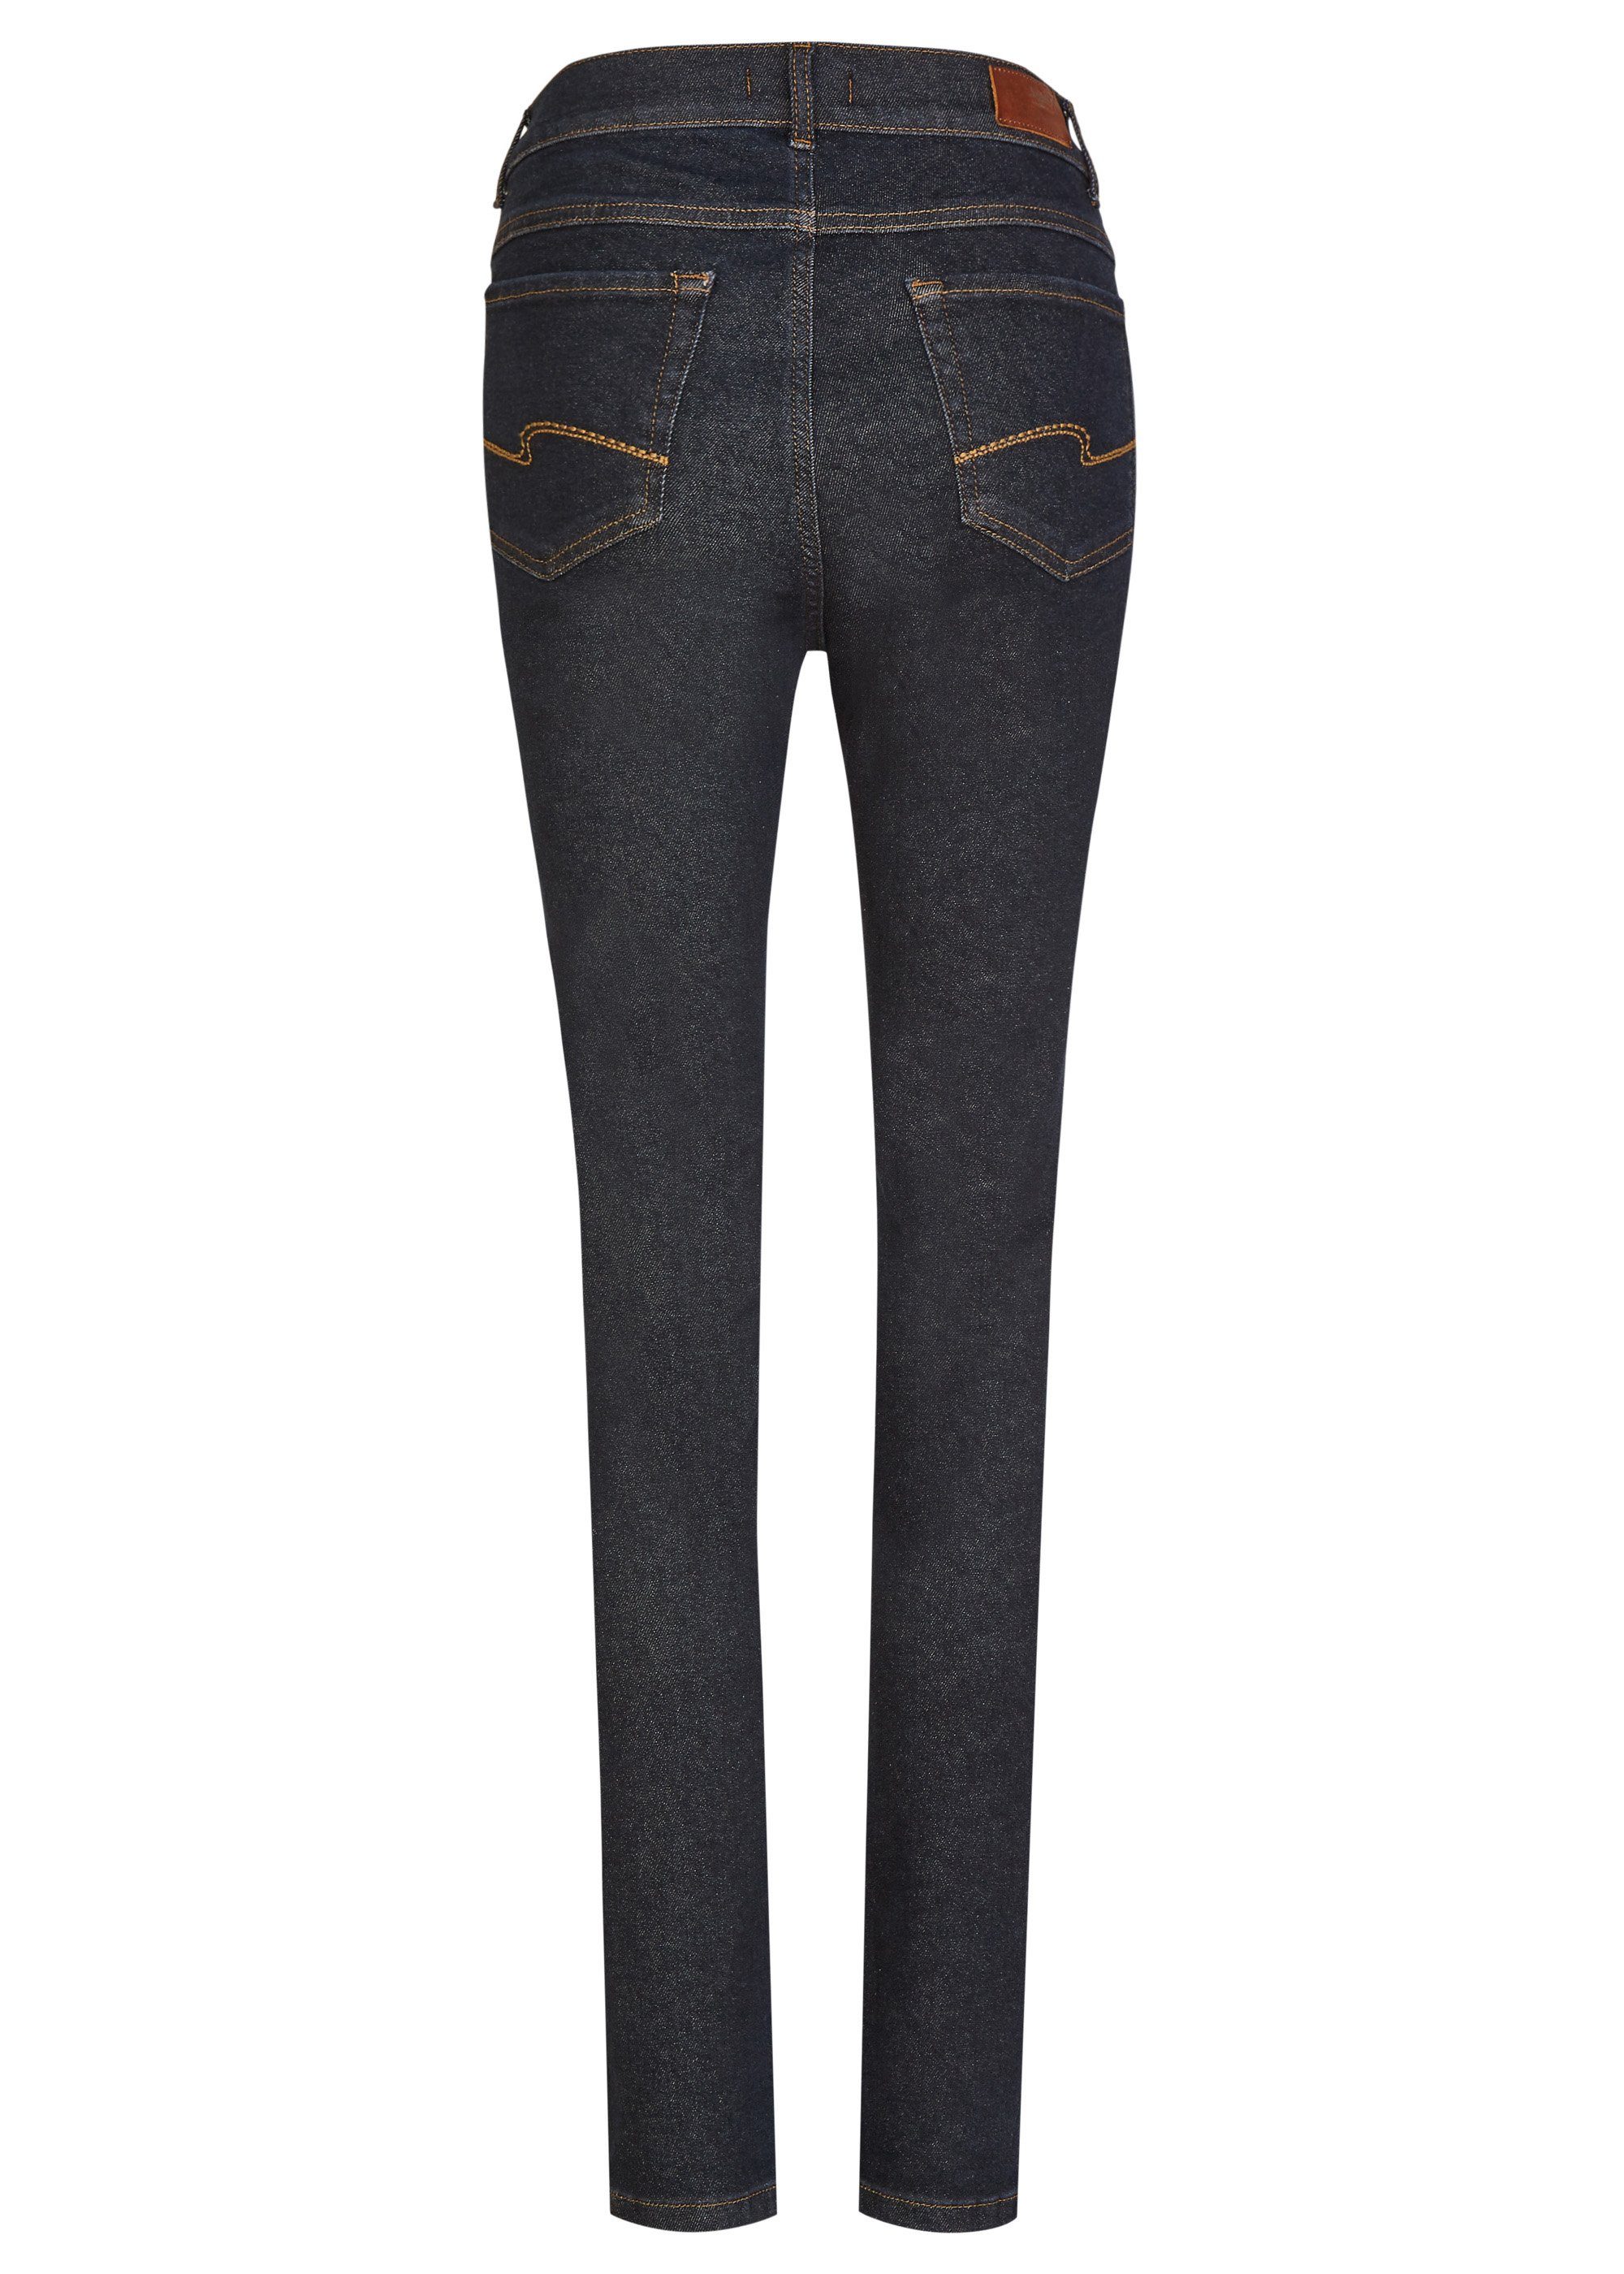 blue night - 325 STRETCH Stretch-Jeans 12.30 SKINNY JEANS ANGELS ANGELS